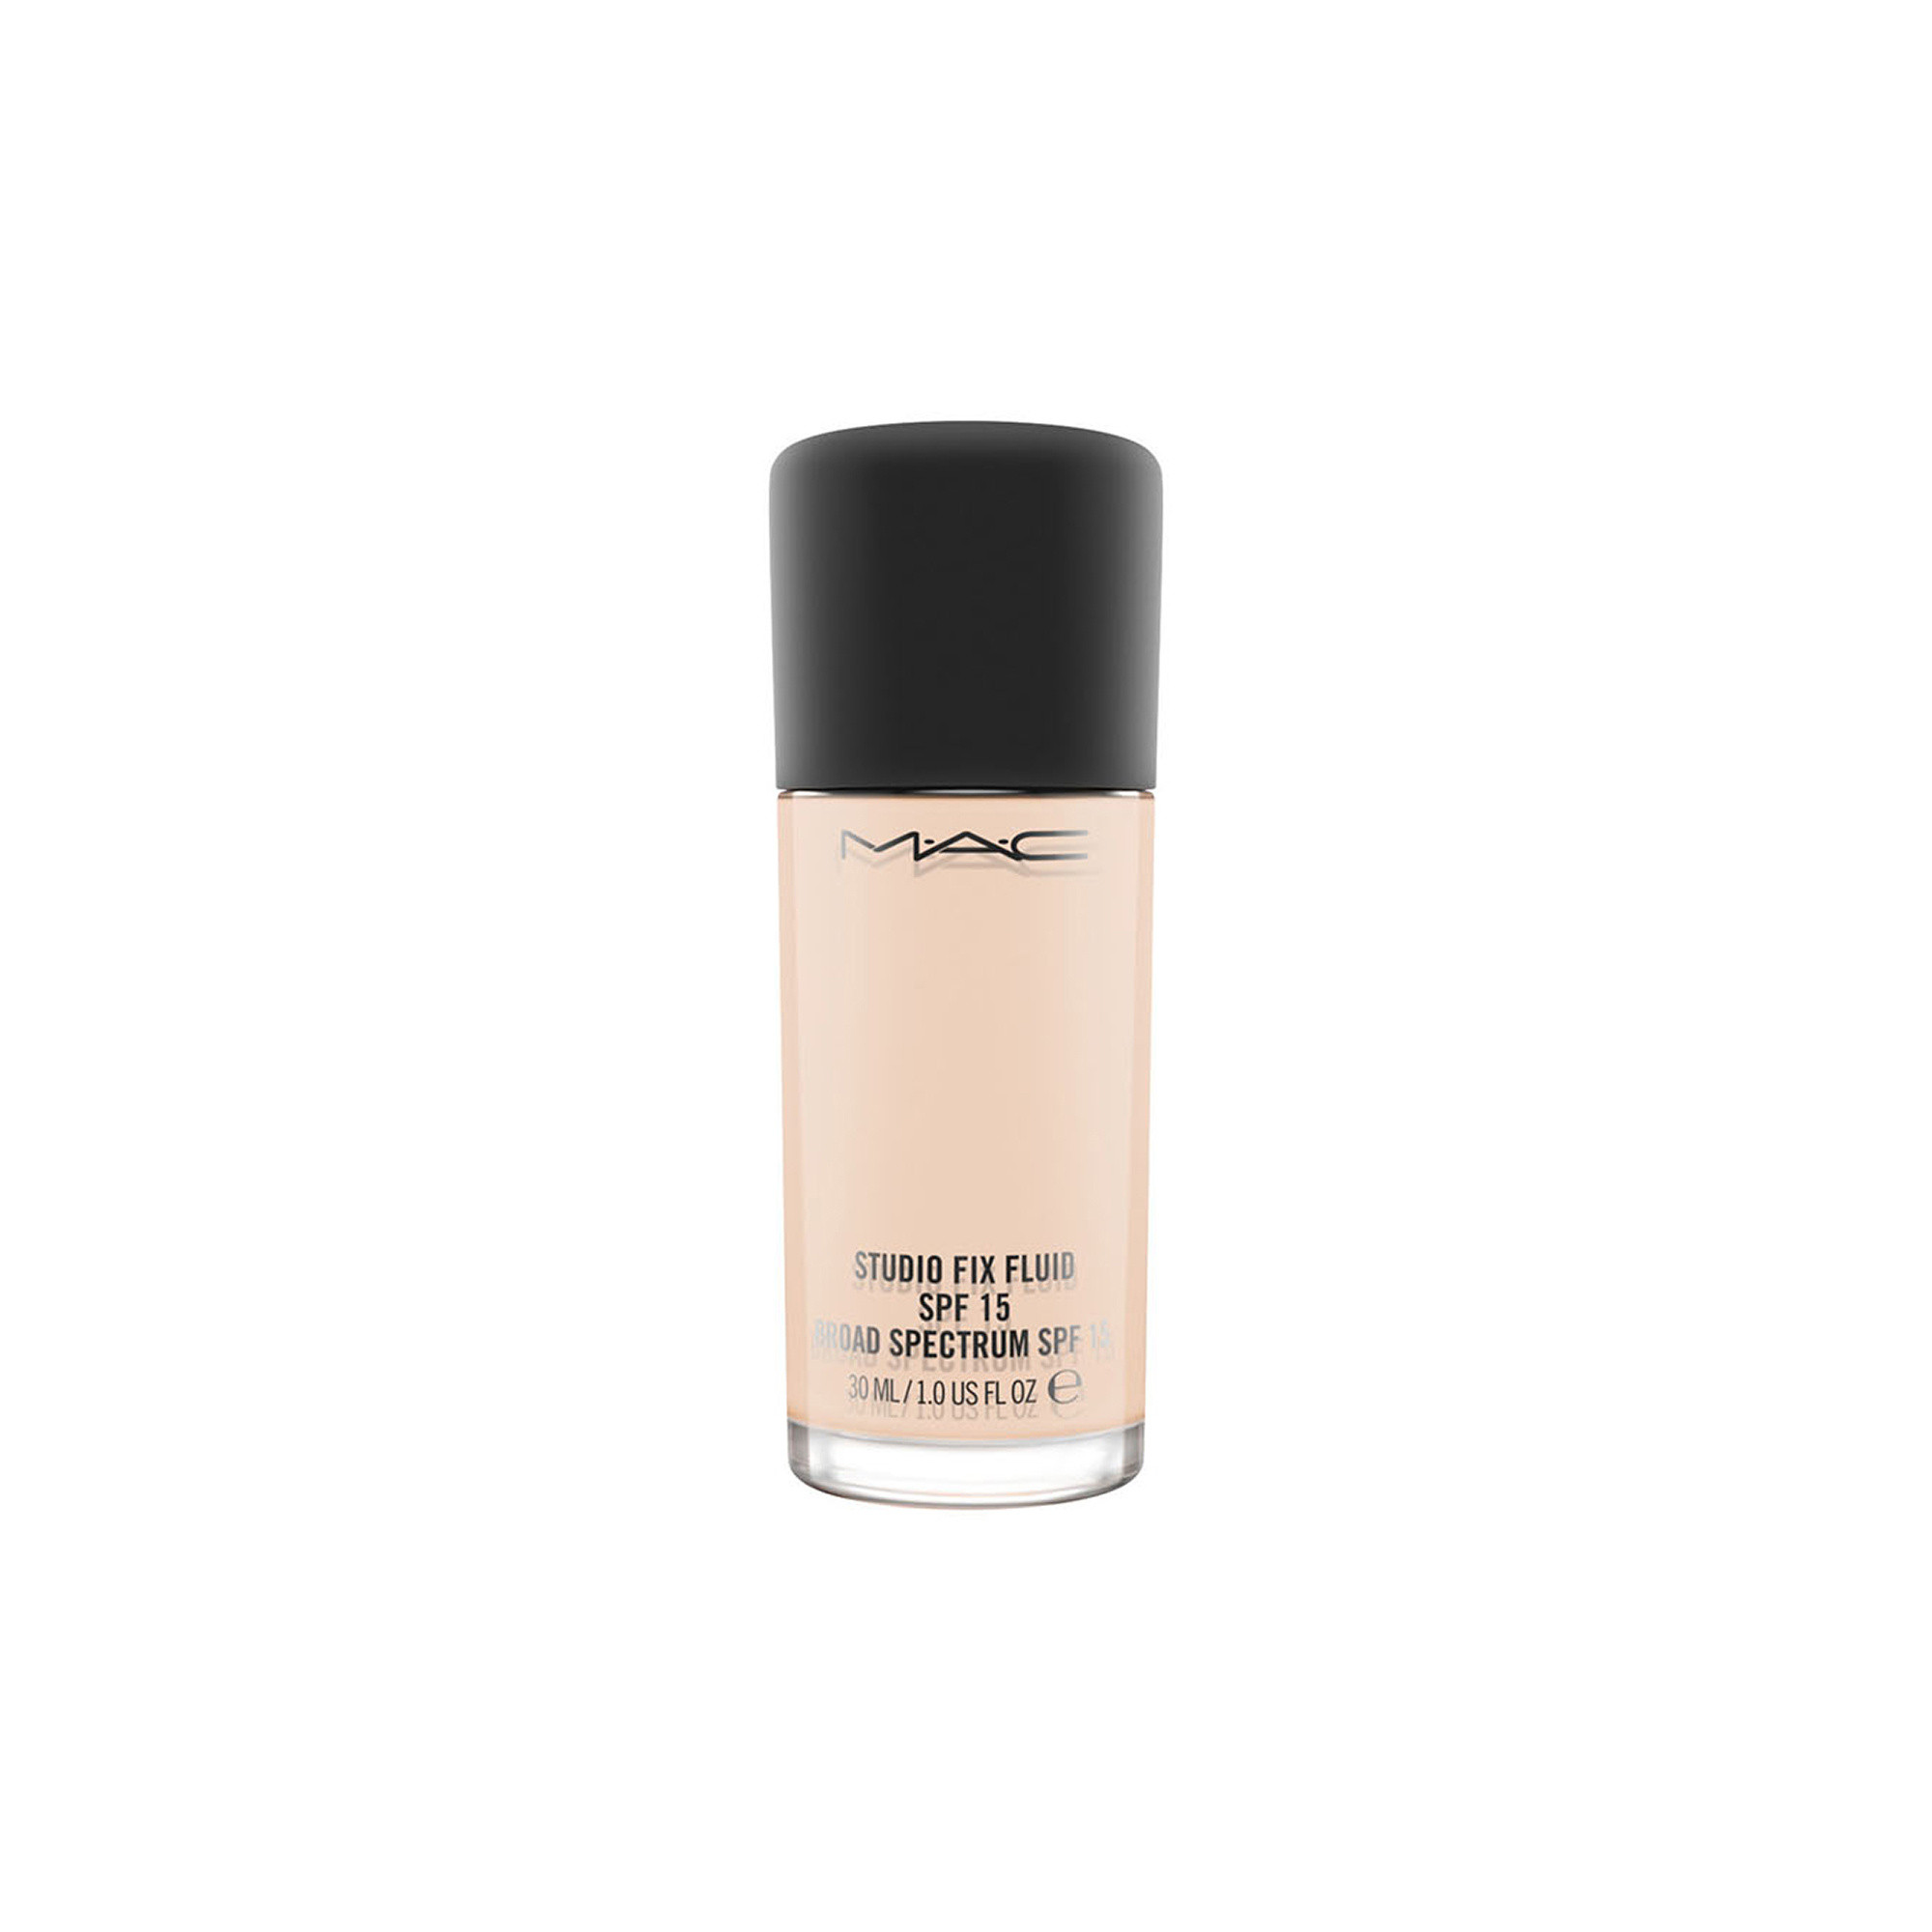 Studio Fix Fluid Foundation Spf15 - NW10, NW10, large image number 0